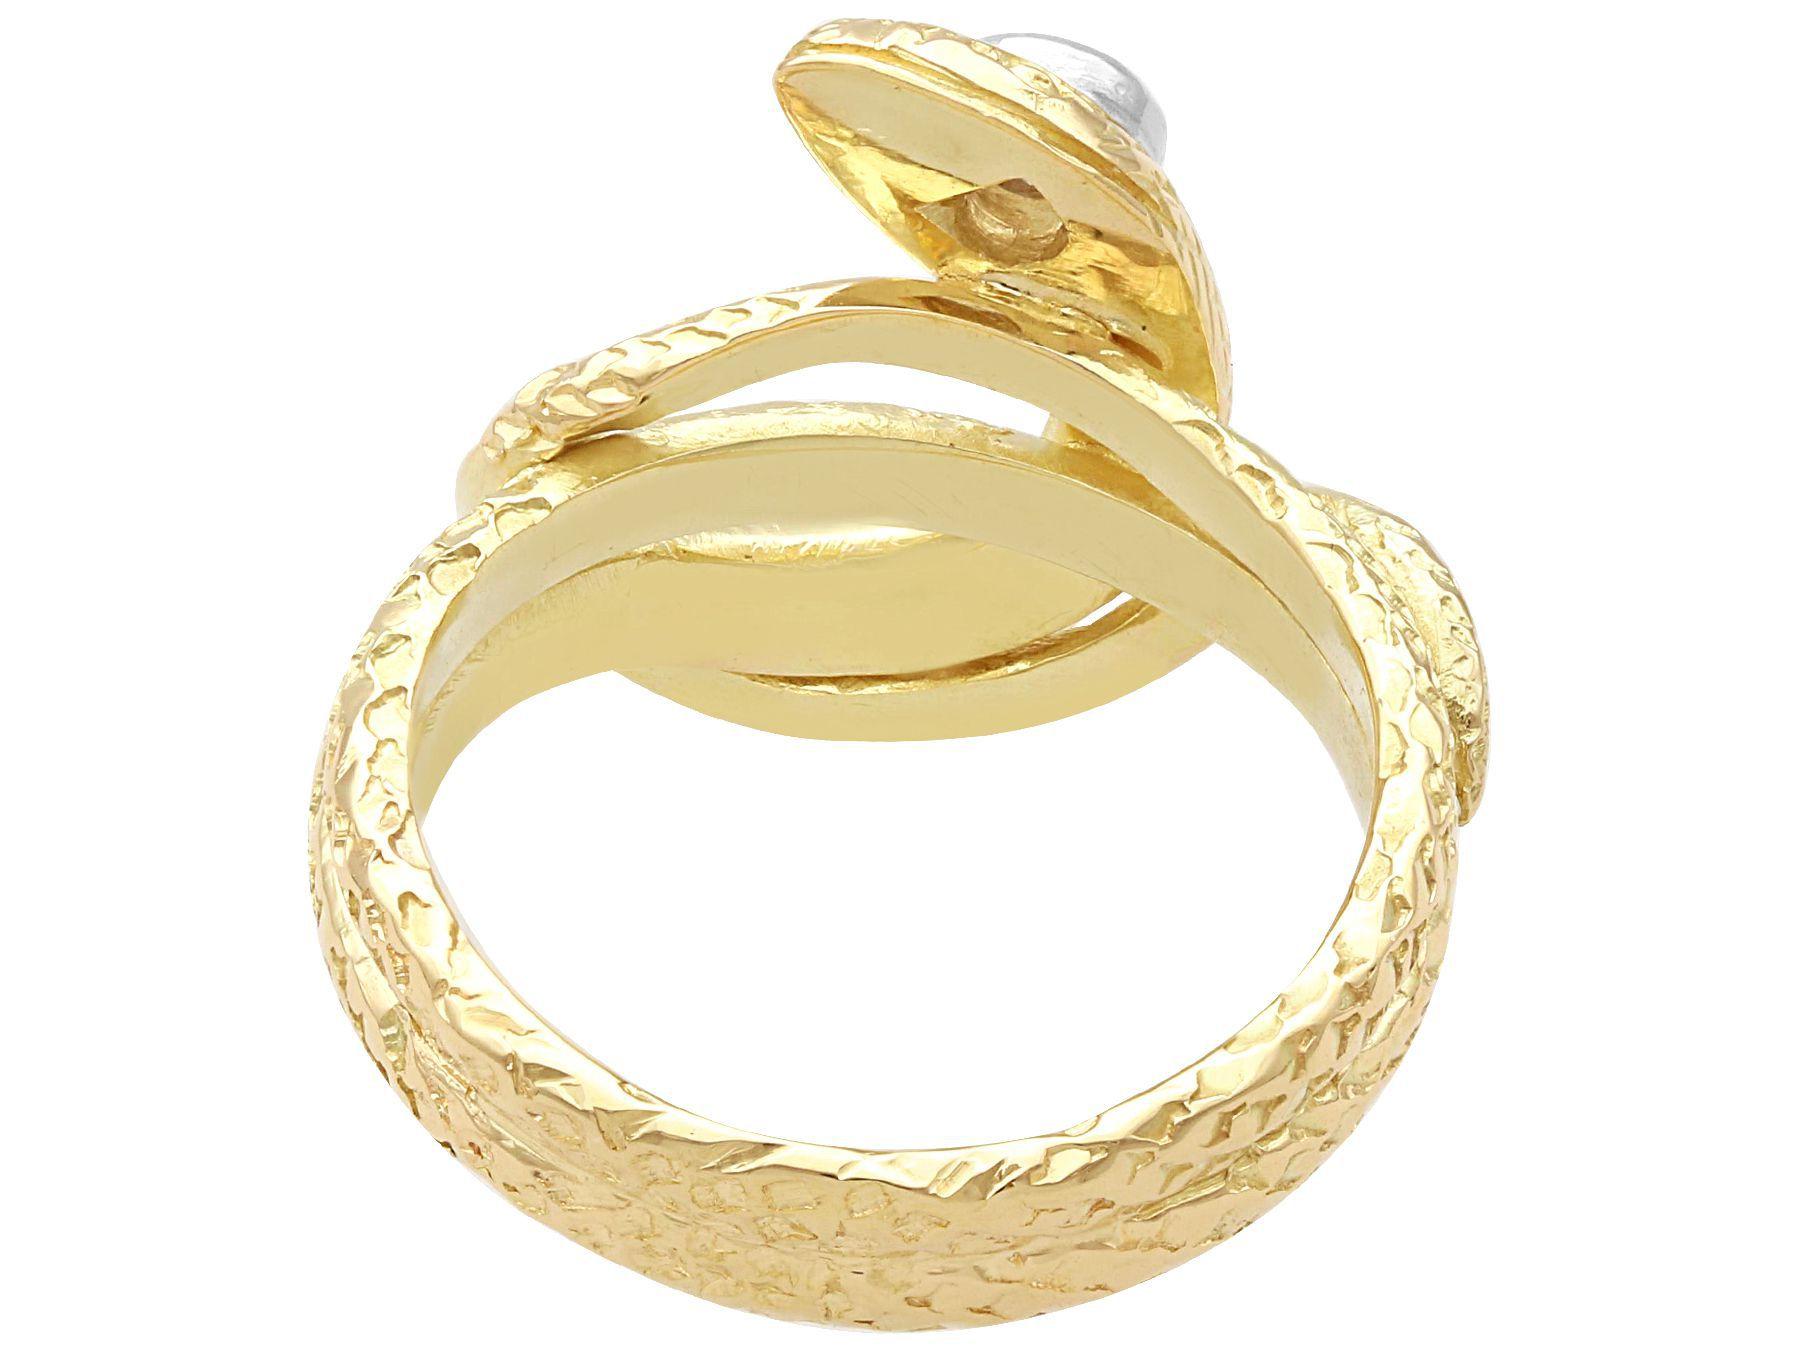 Vintage 0.13ct Diamond and 14ct Yellow Gold Snake Ring In Excellent Condition For Sale In Jesmond, Newcastle Upon Tyne